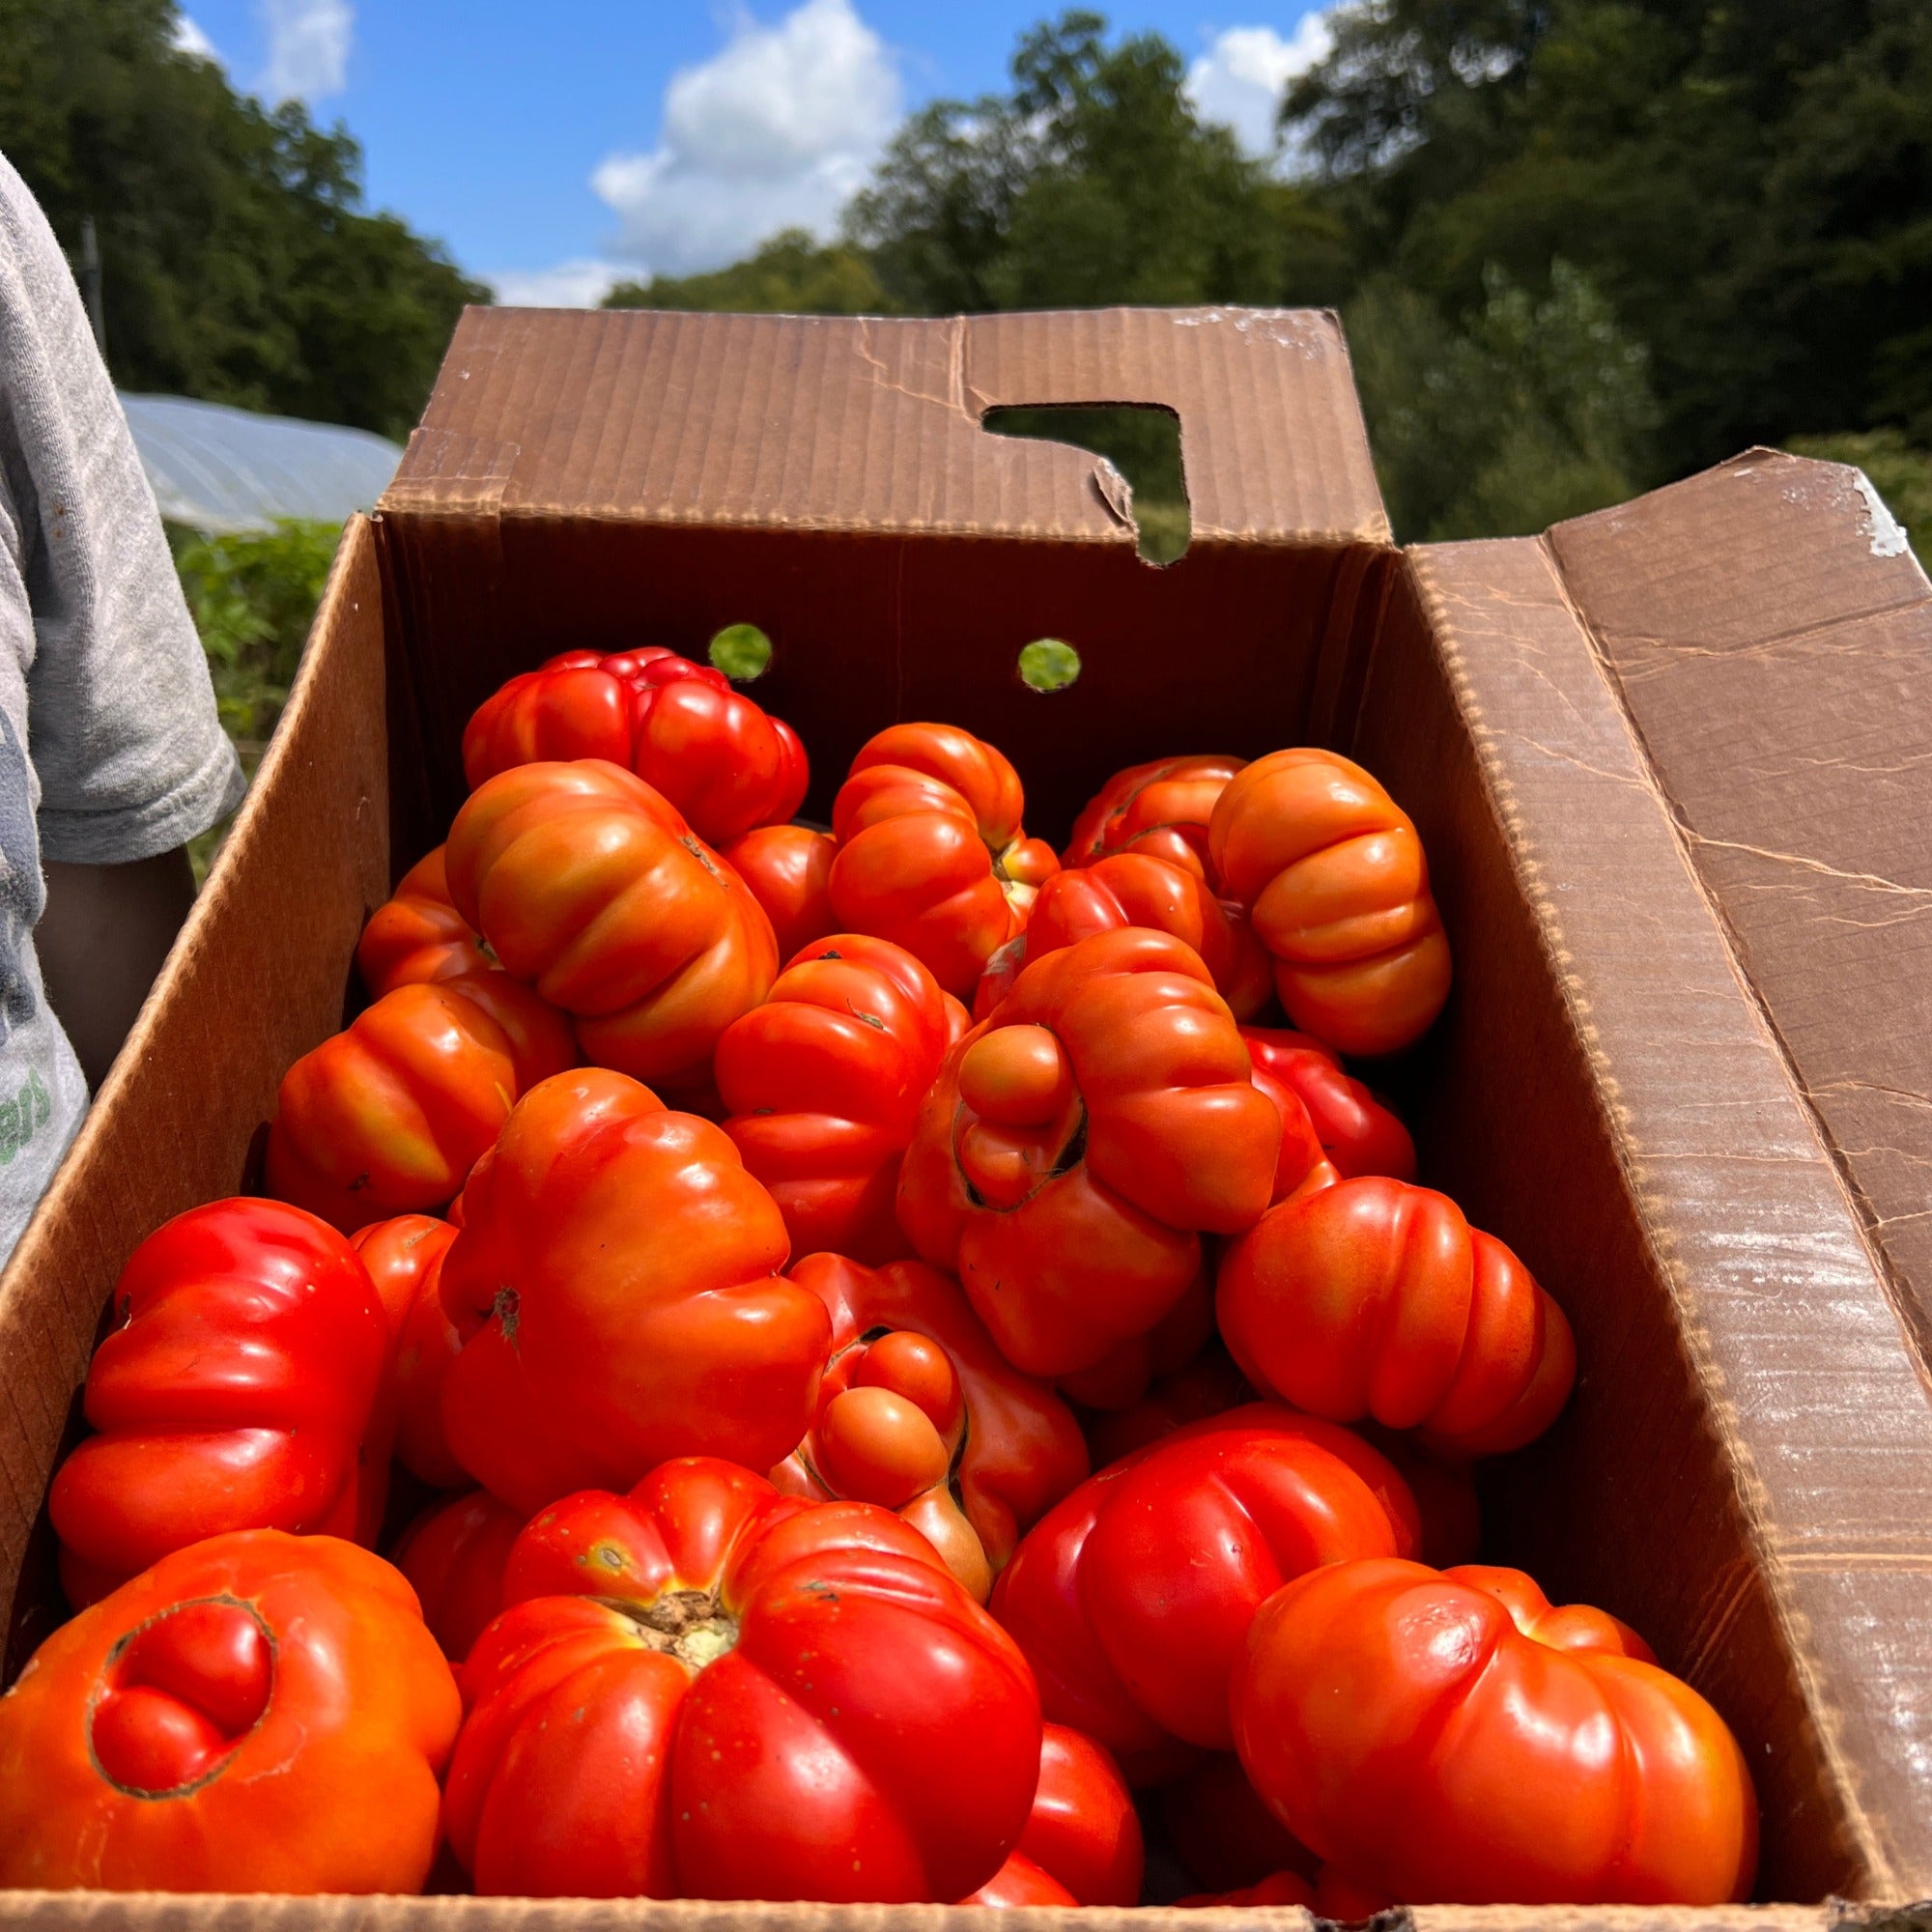 A box of pisanello tomatoes harvested in the garden